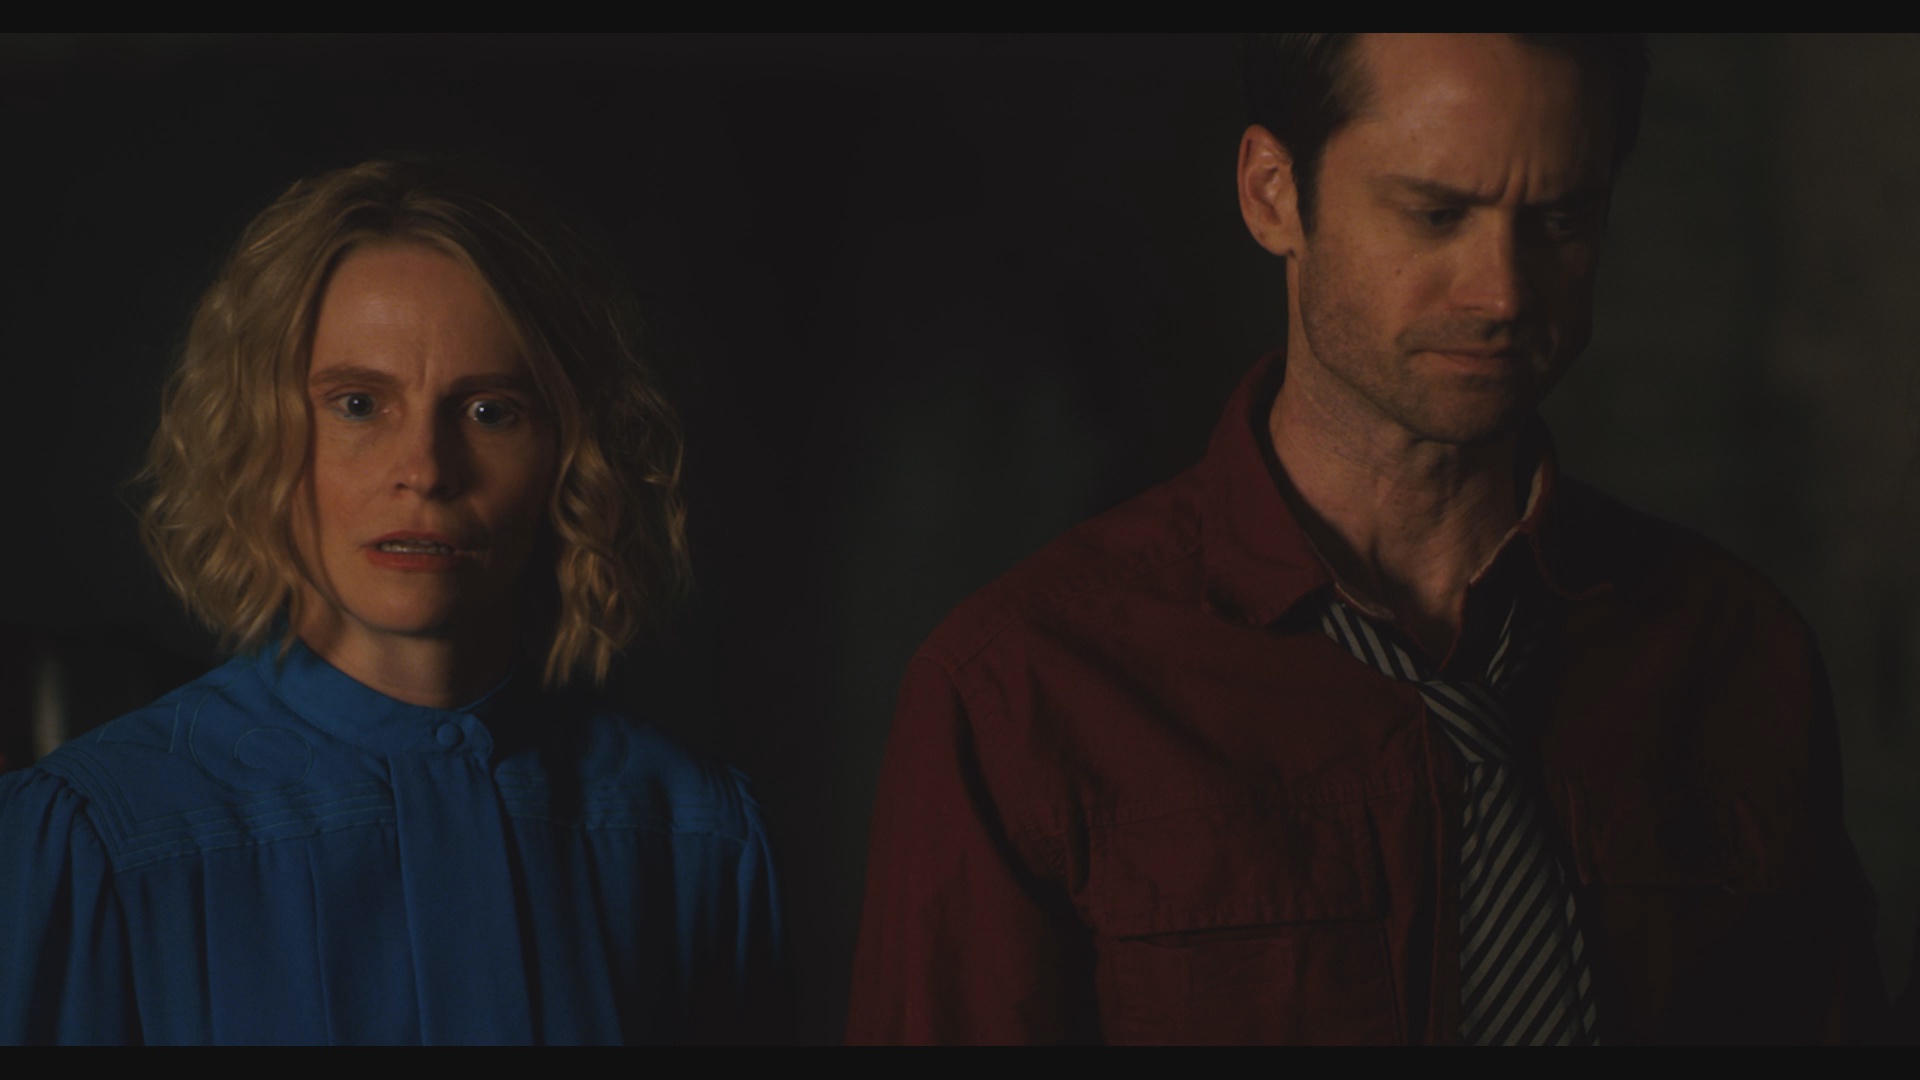 'Inherit the Witch', directed by Cradeaux Alexander & produced by Rohan Quine - still (602) - Michelle Hudson as Stephanie, and Fergus Foster as Paul